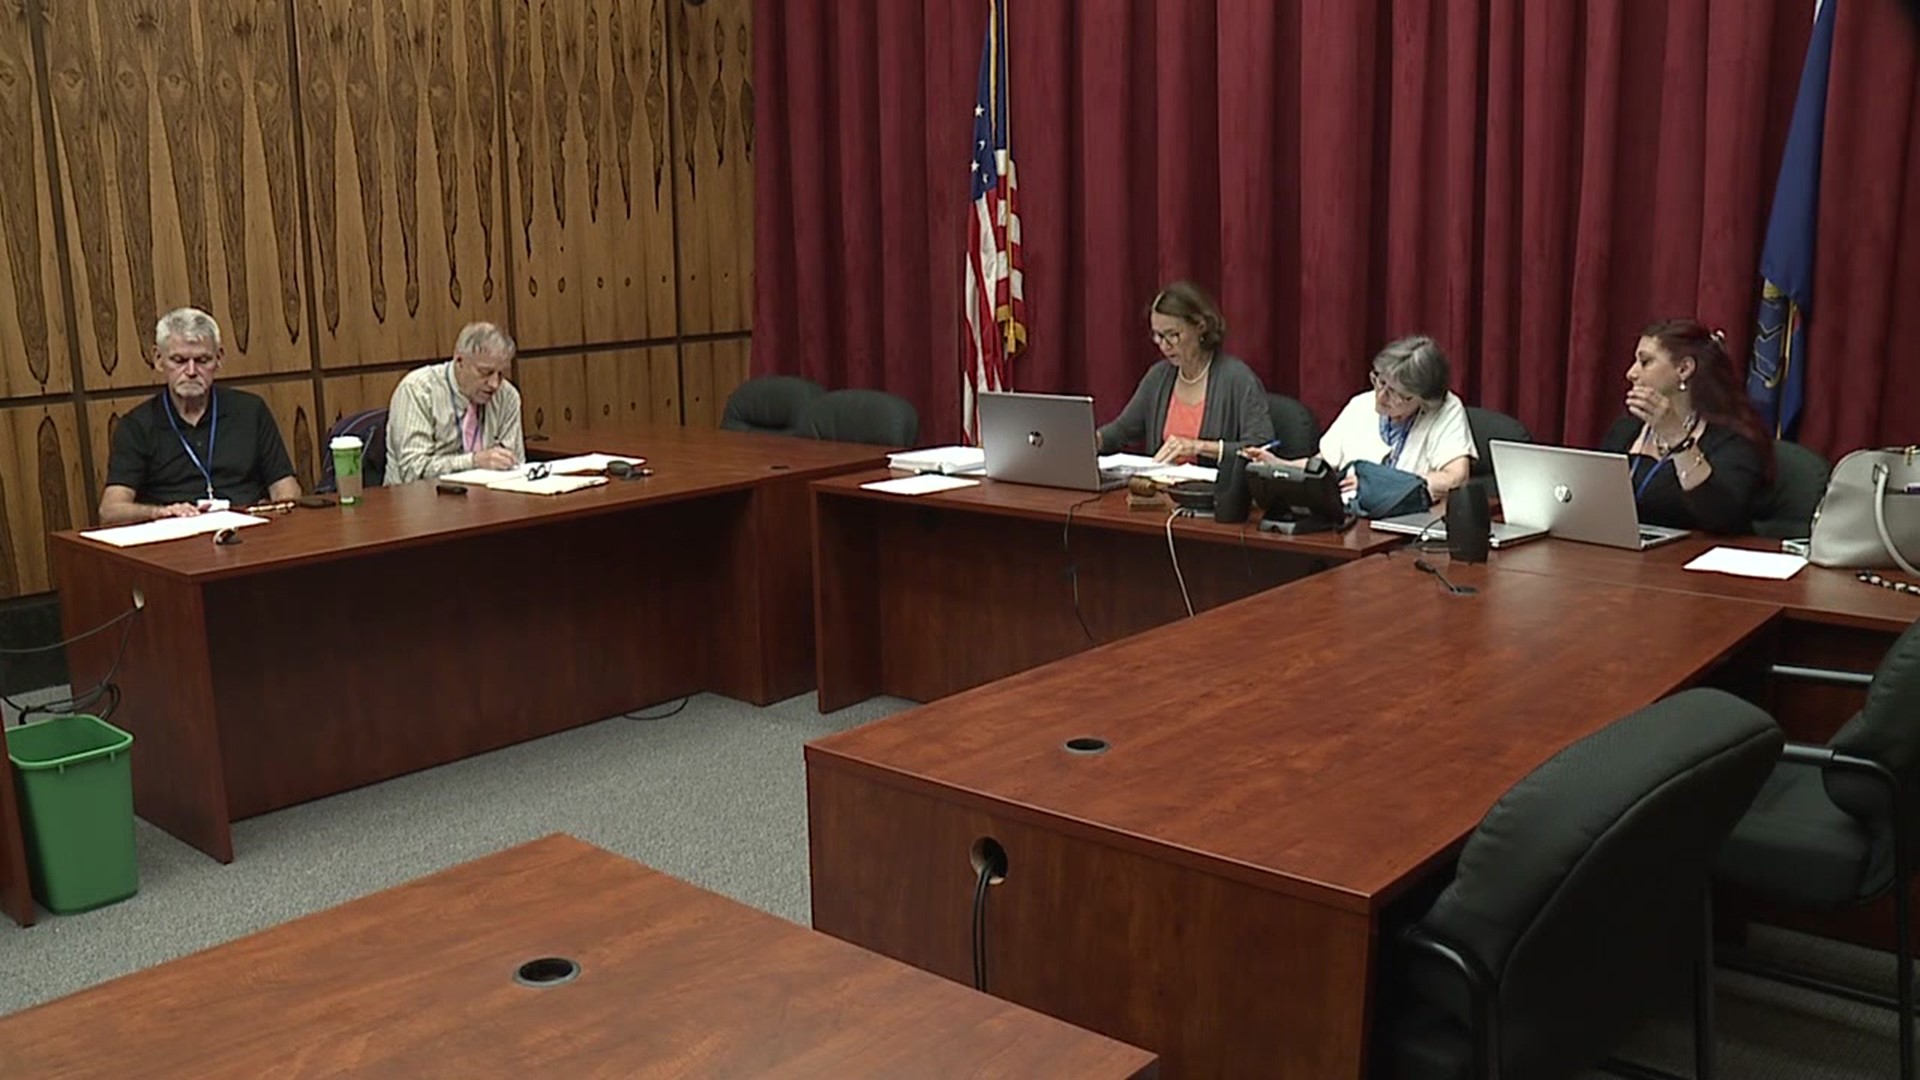 The Luzerne County election board decided the ballot question is "too flawed" and confusing to be included on the November ballot.